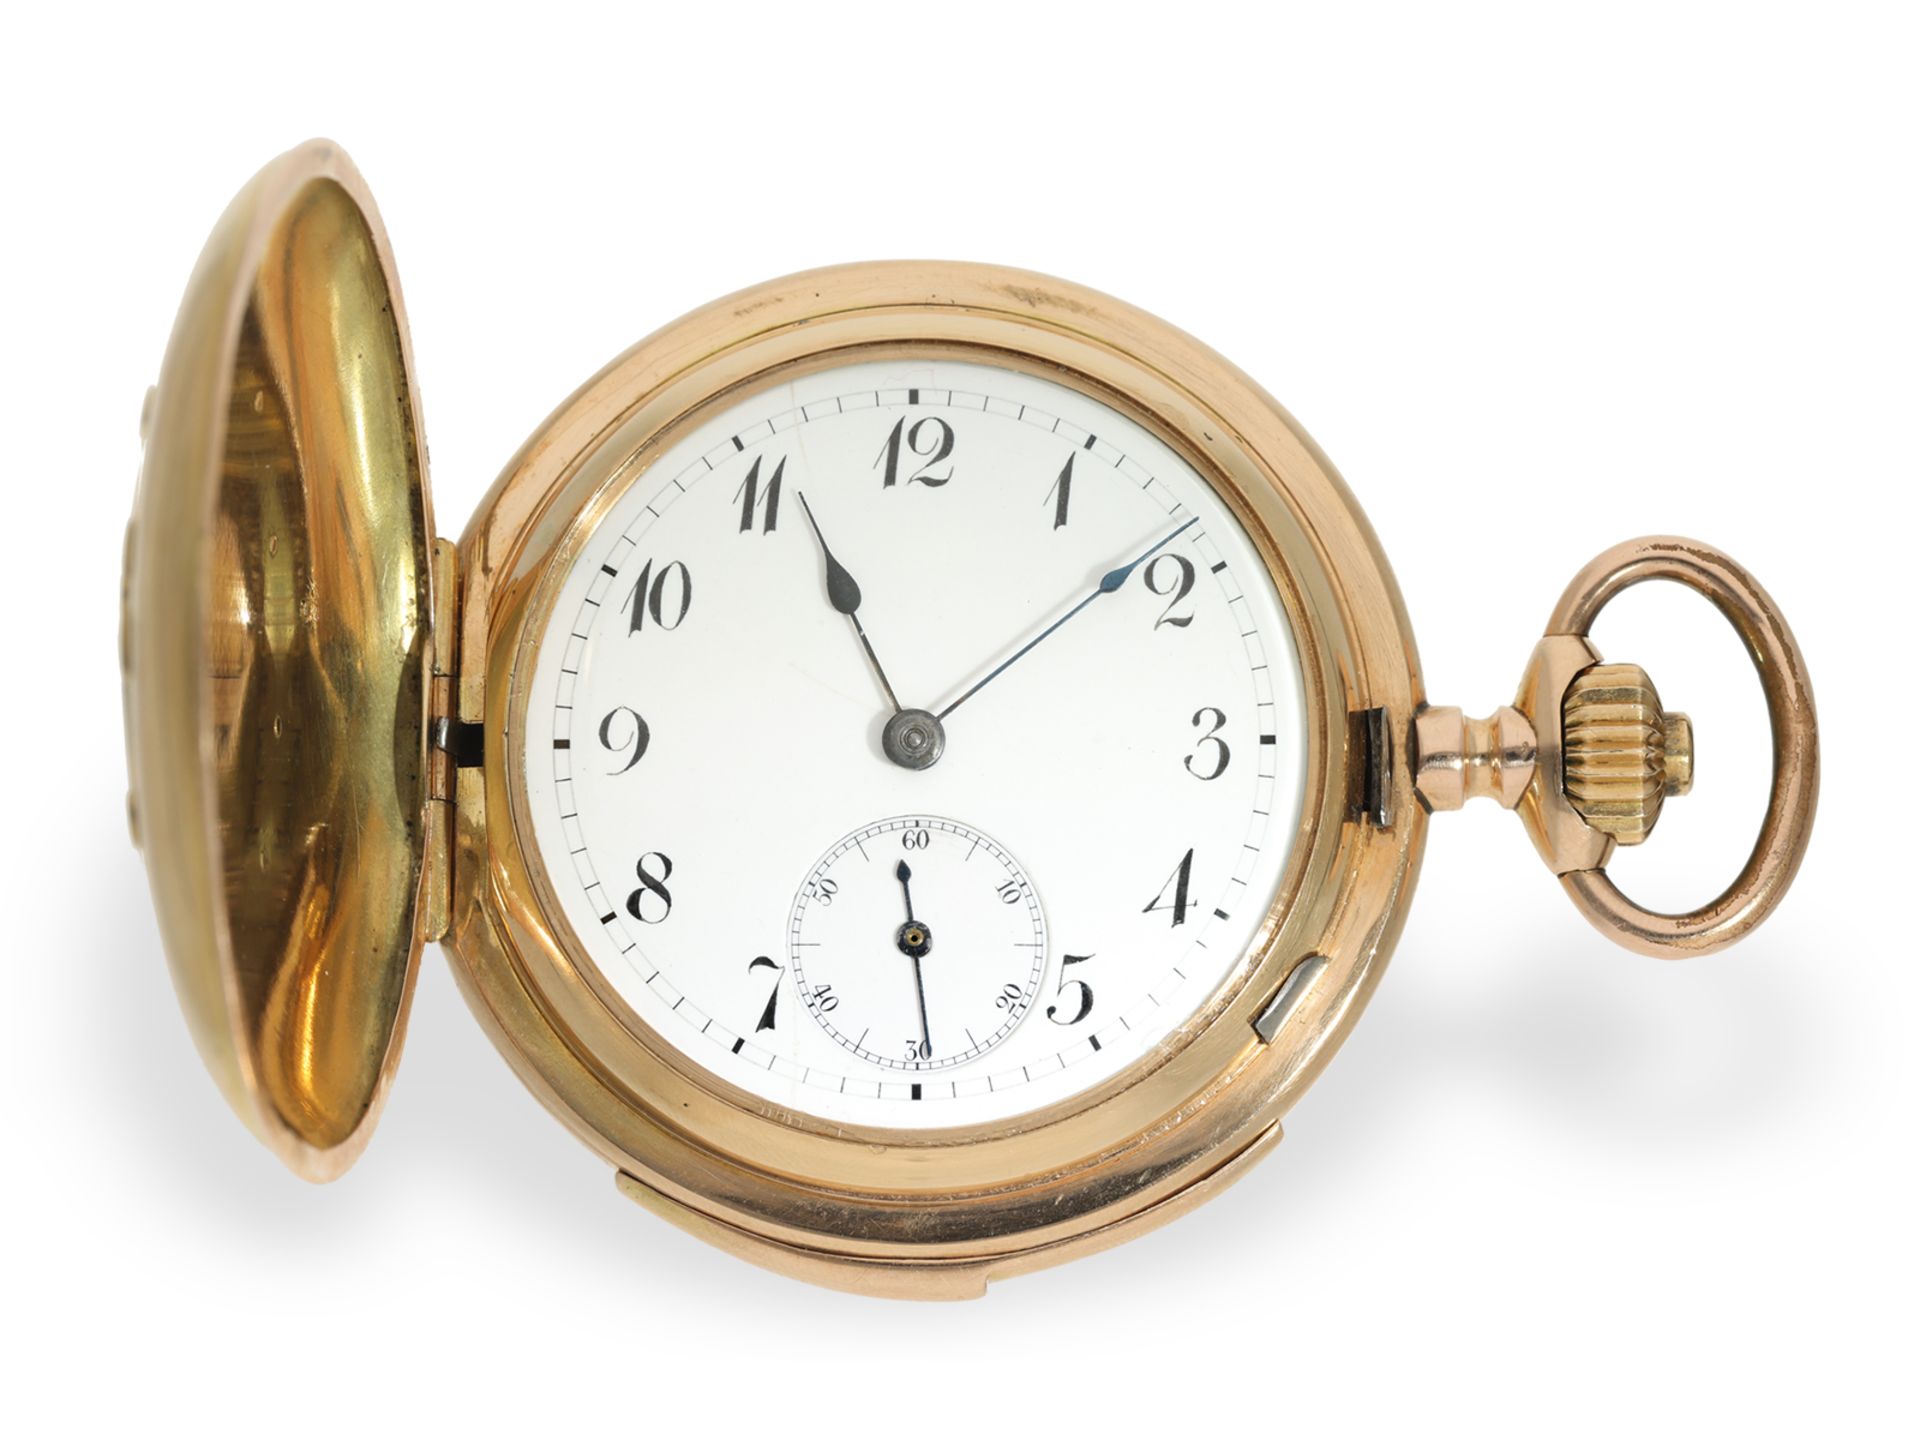 Pocket watch: heavy gold hunting case watch with minute repeater and erotic automaton, ca. 1900 - Image 2 of 6